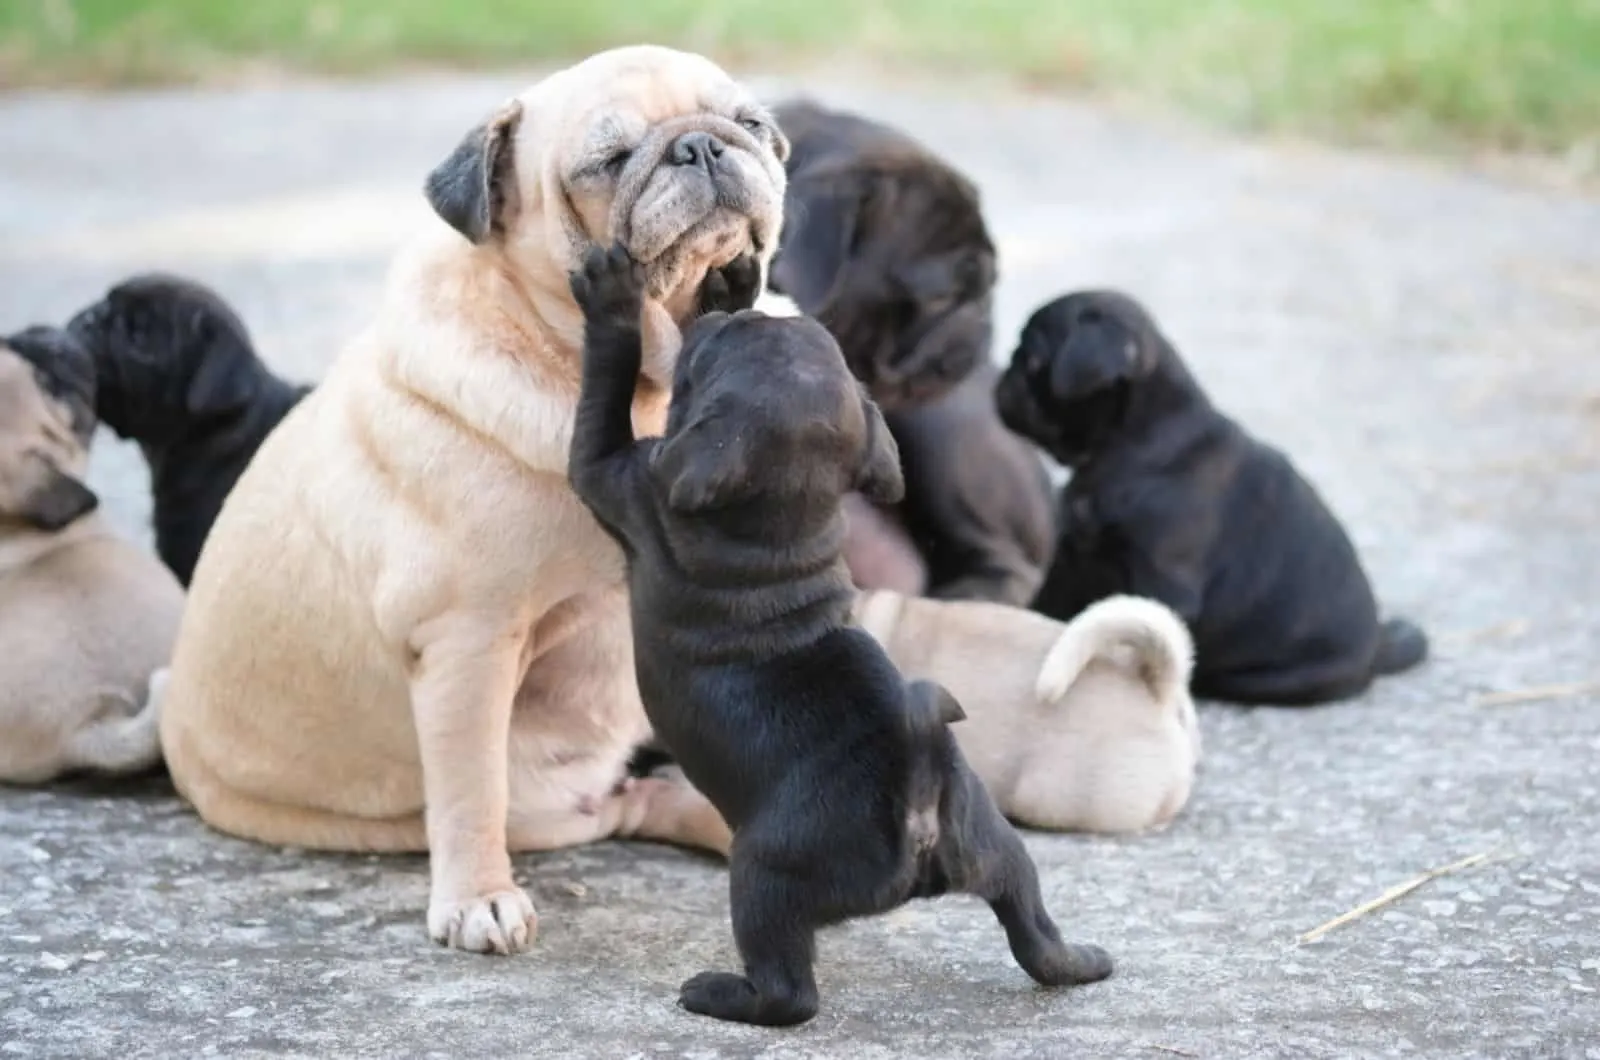 newborn pug puppies and their mother